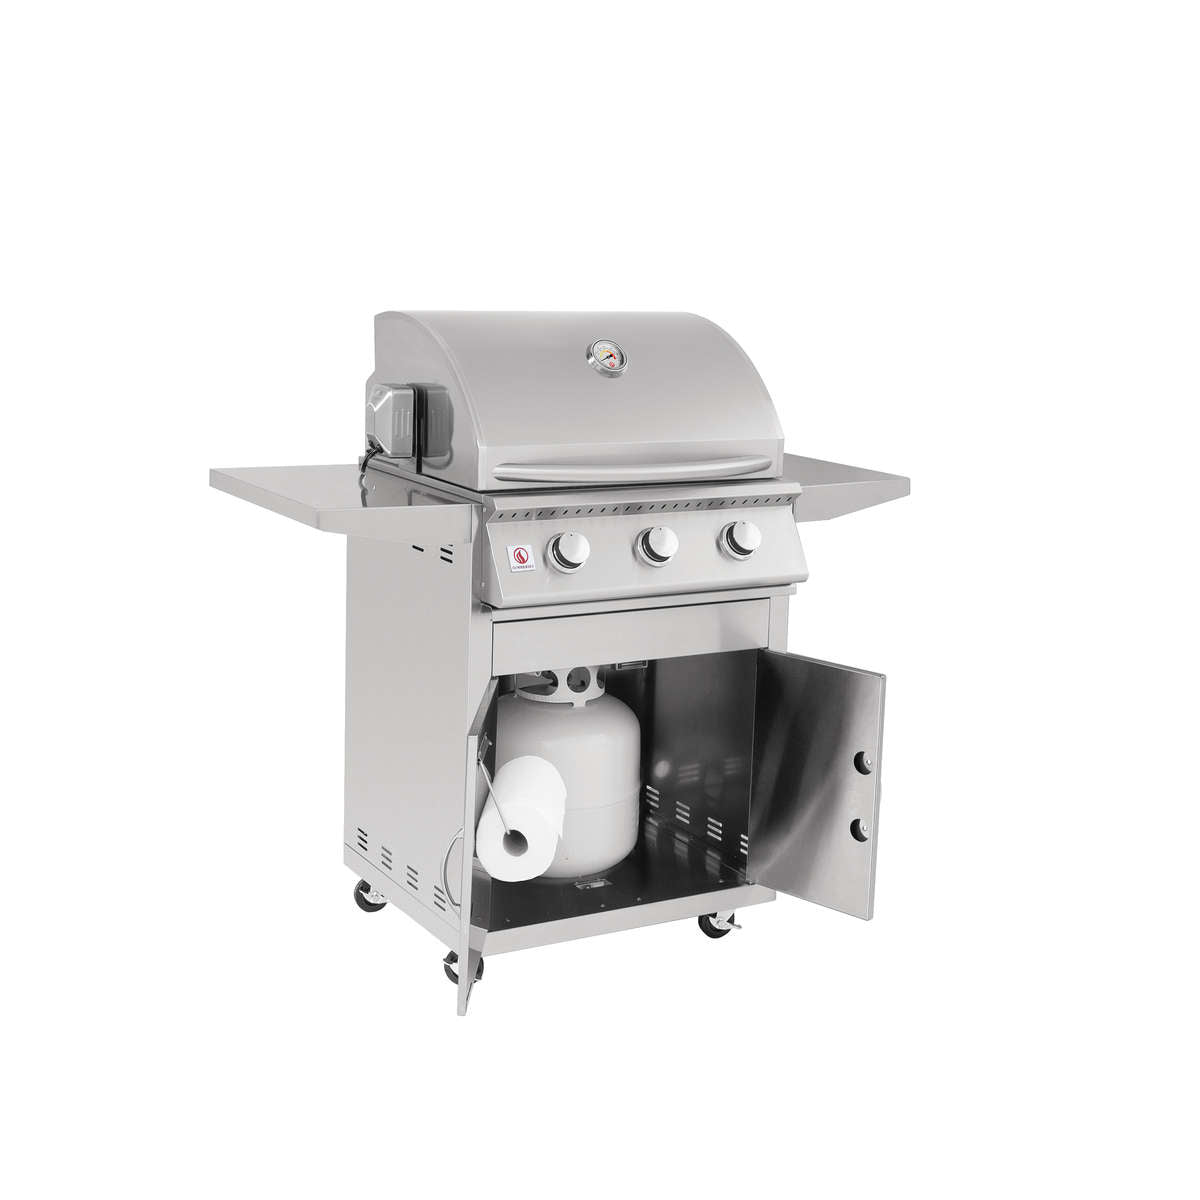 Summerset Sizzler 26 Inch Propane Grill on Cart